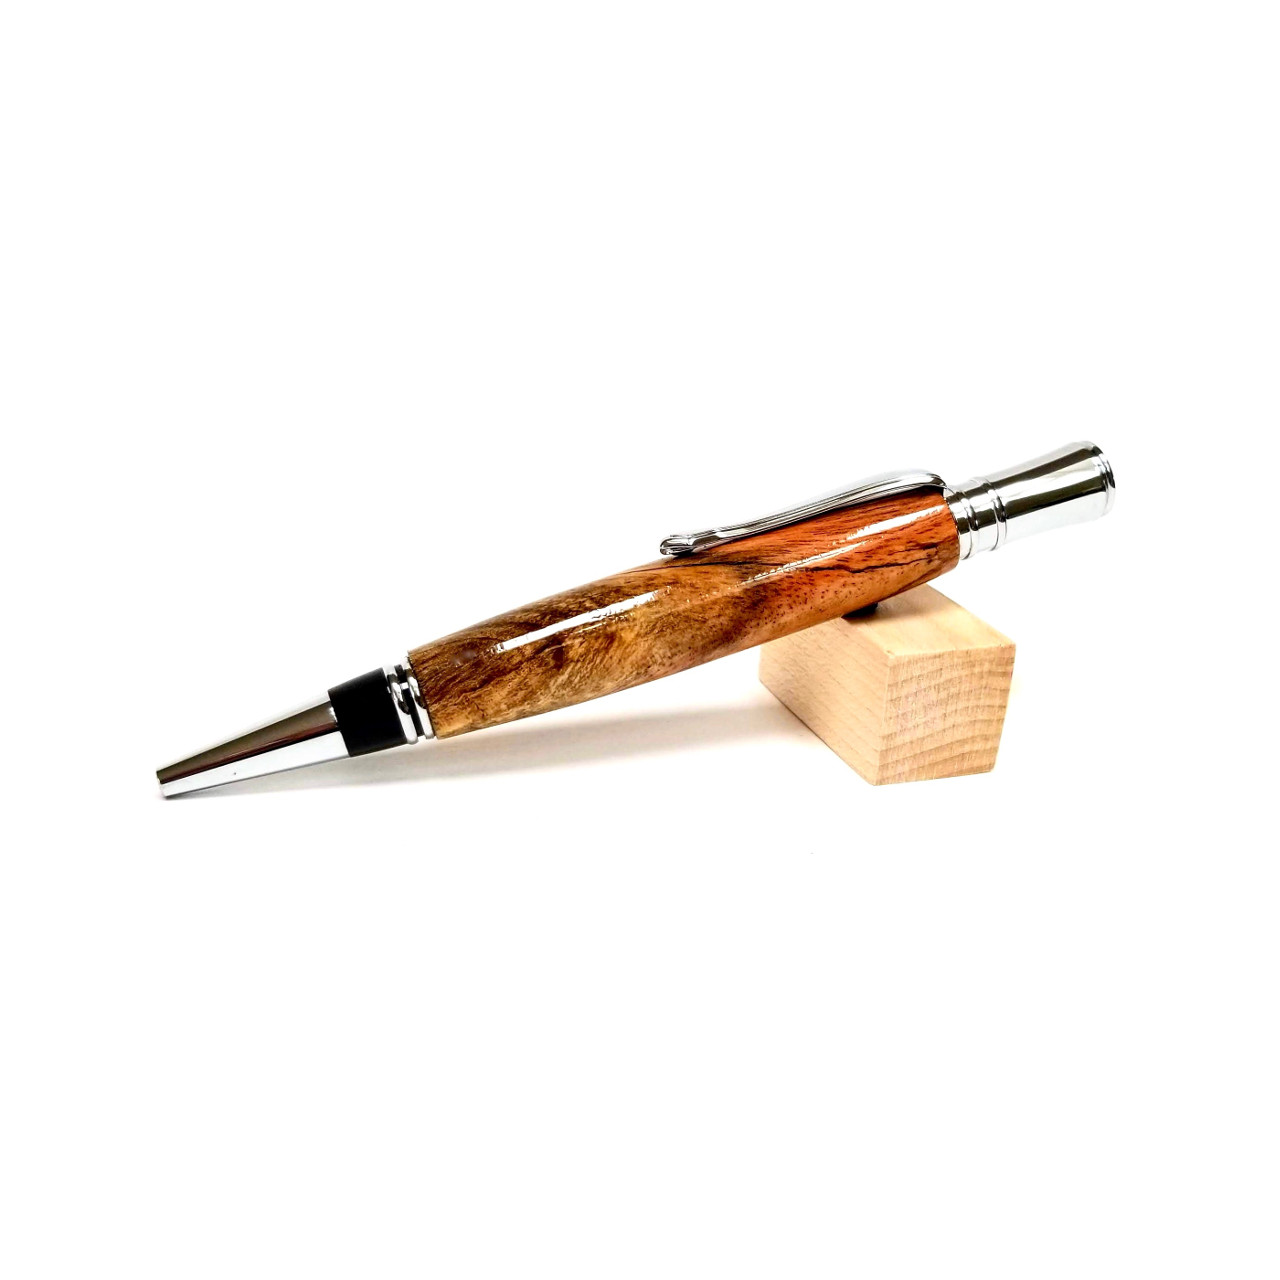 Rare Flame Box Elder hand turned pen with gold metal finish.